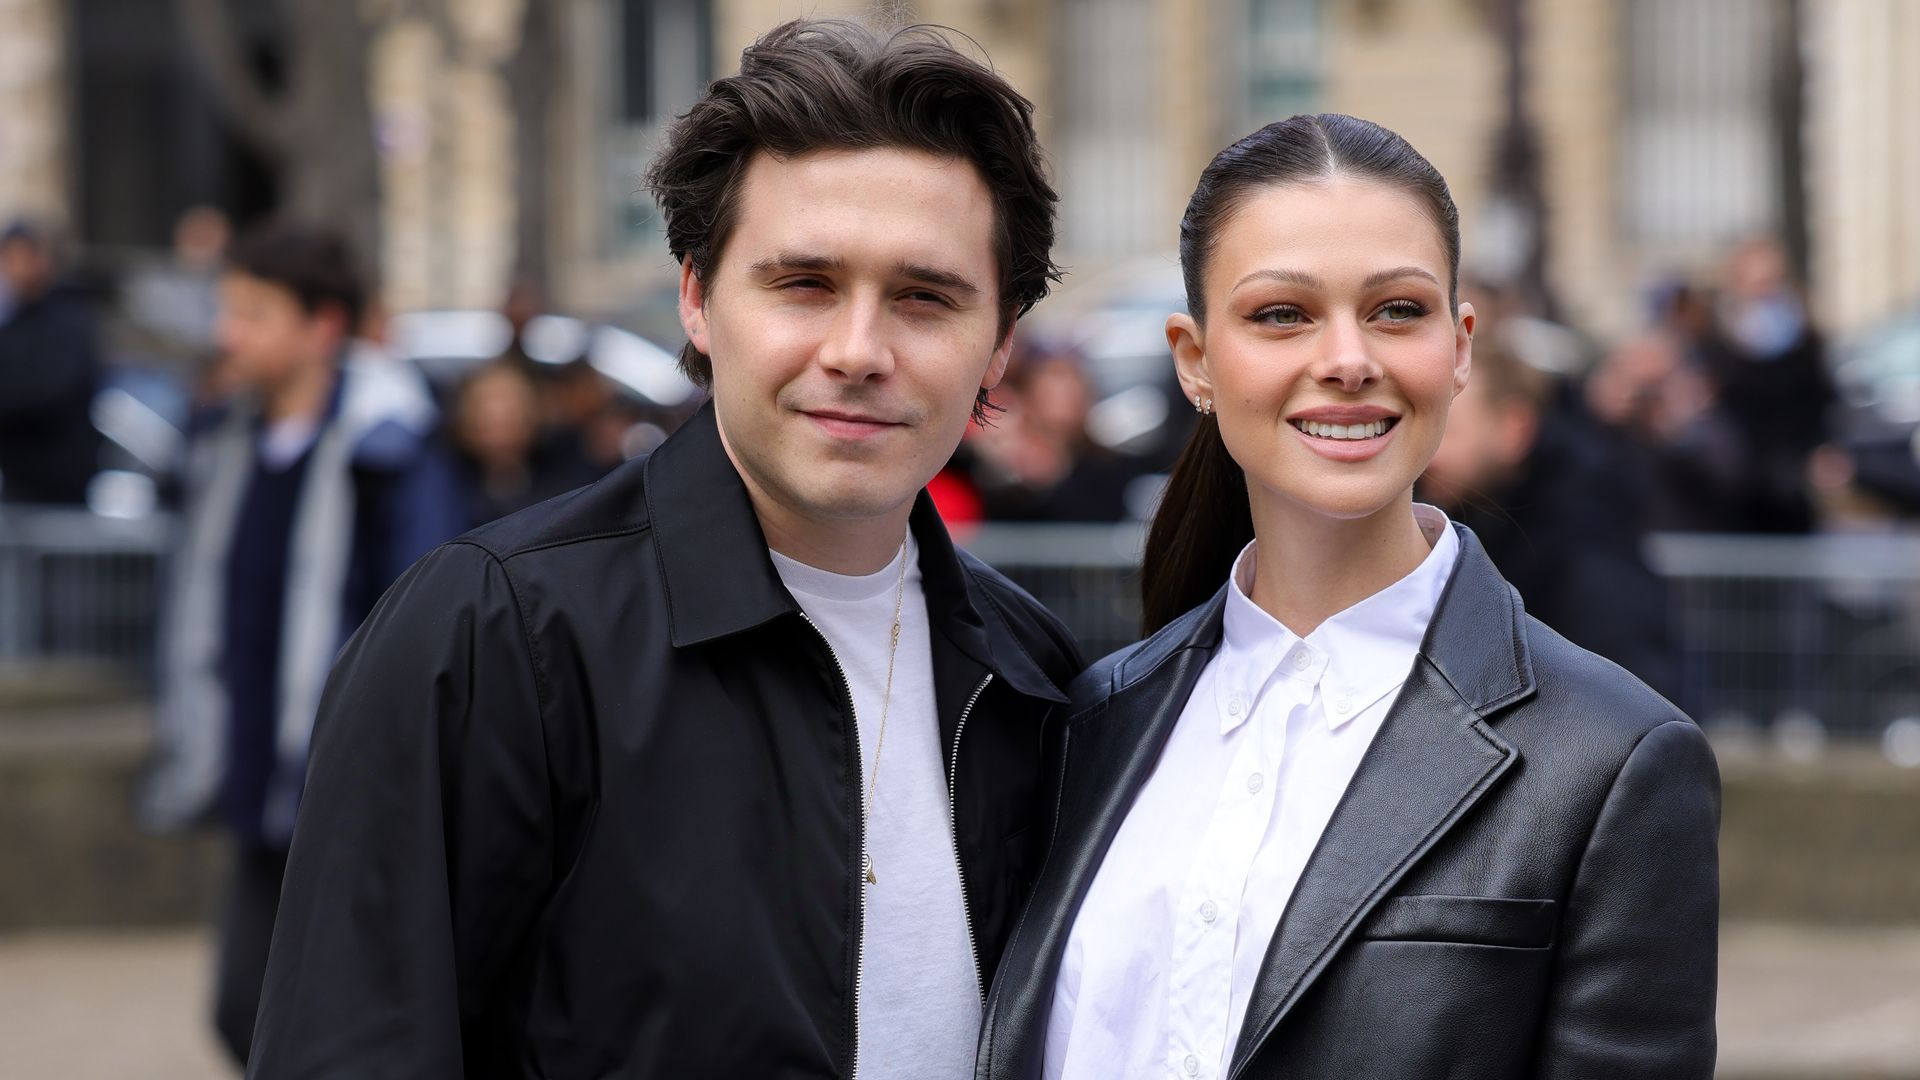 PARIS, FRANCE - MARCH 07: Brooklyn Beckham and Nicola Peltz attend the Miu Miu Womenswear Fall Winter 2023-2024 show as part of Paris Fashion Week on March 07, 2023 in Paris, France. (Photo by Pierre Suu/Getty Images)